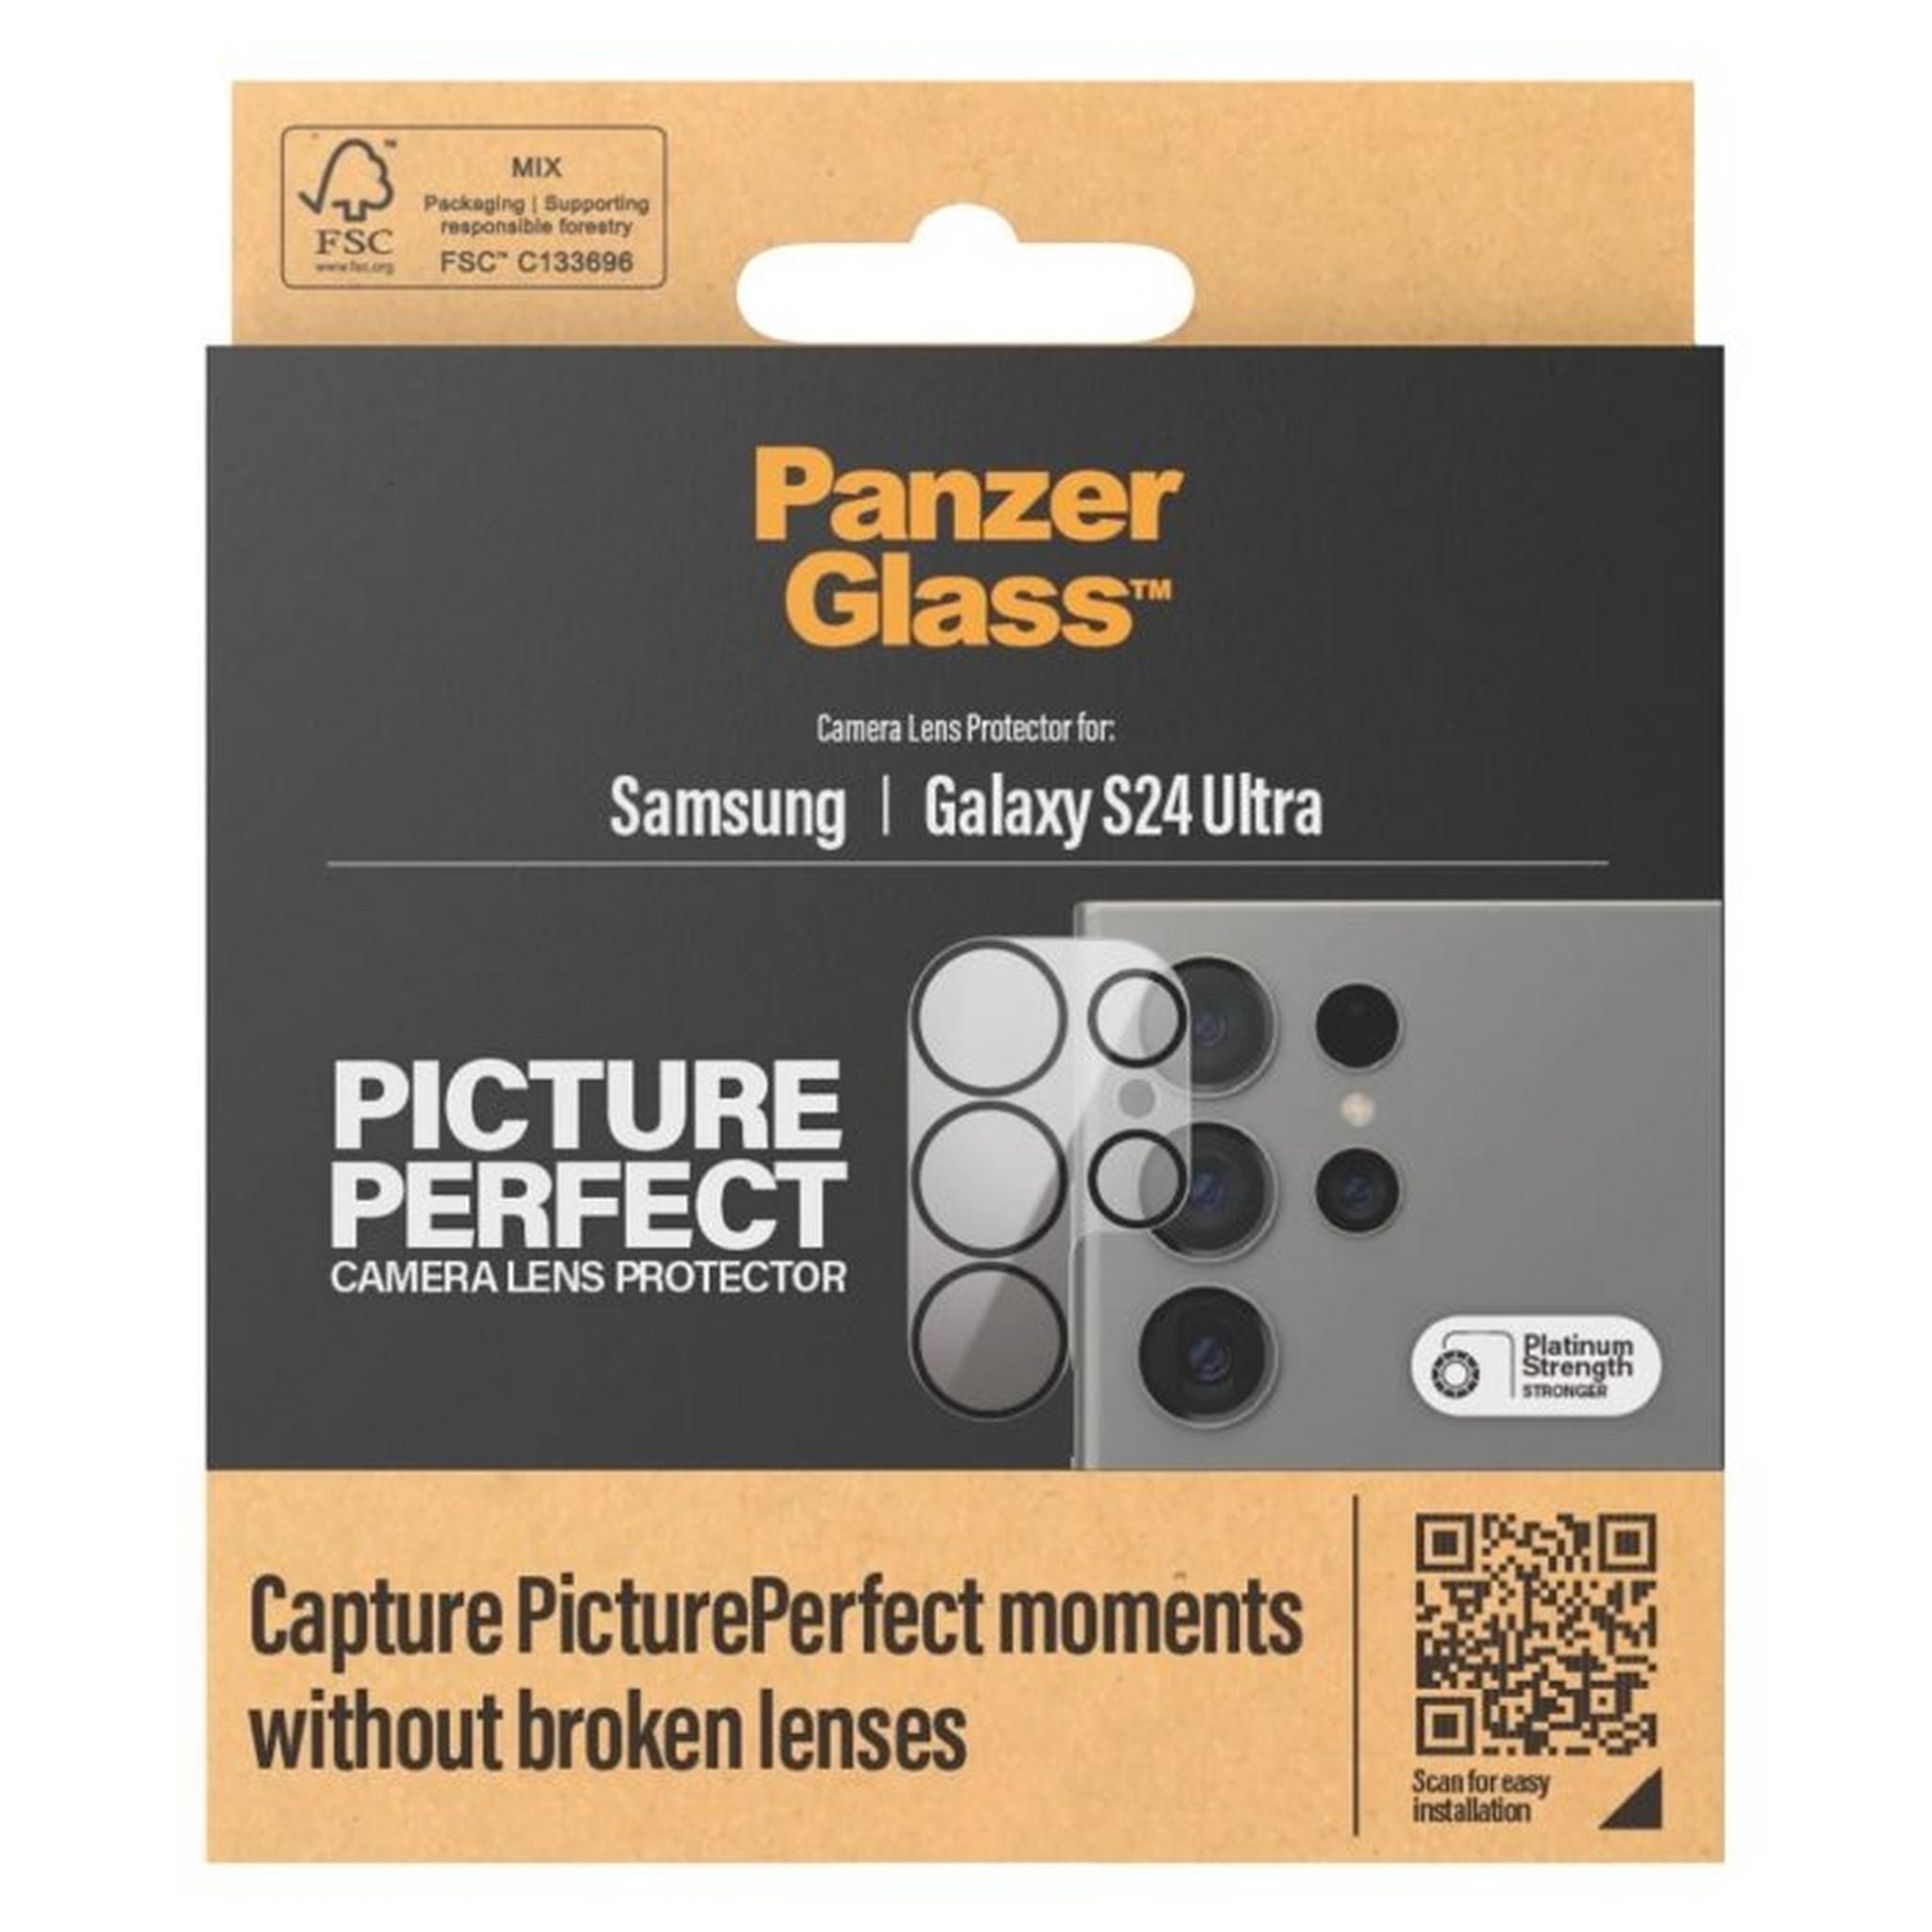 PANZER Glass Picture Perfect Camera Lens Protector for Samsung Galaxy S24 Ultra, 1206